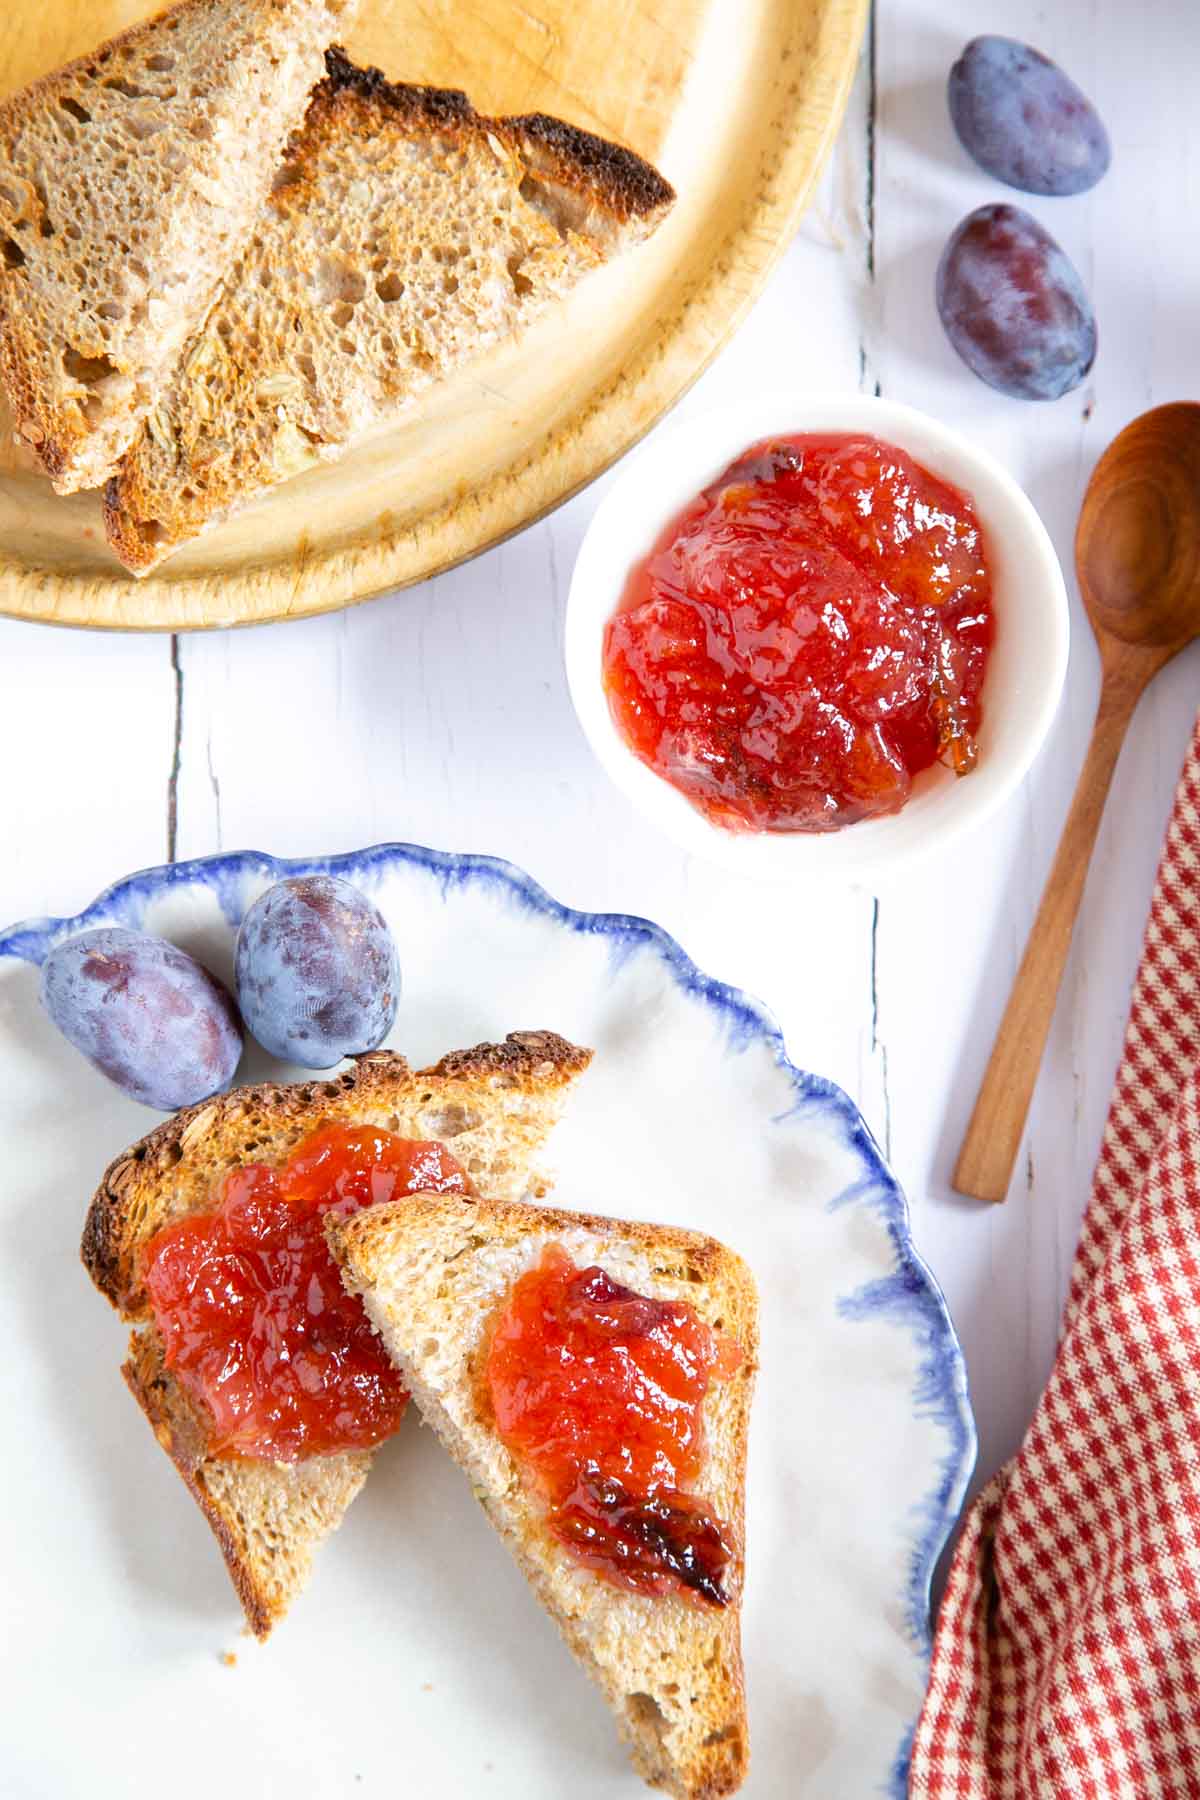 On a rustic whitewashed table, a blue and white plate of toast spread with plum and apple jam, a dish of the jam and fresh toast on a wooden cutting board.